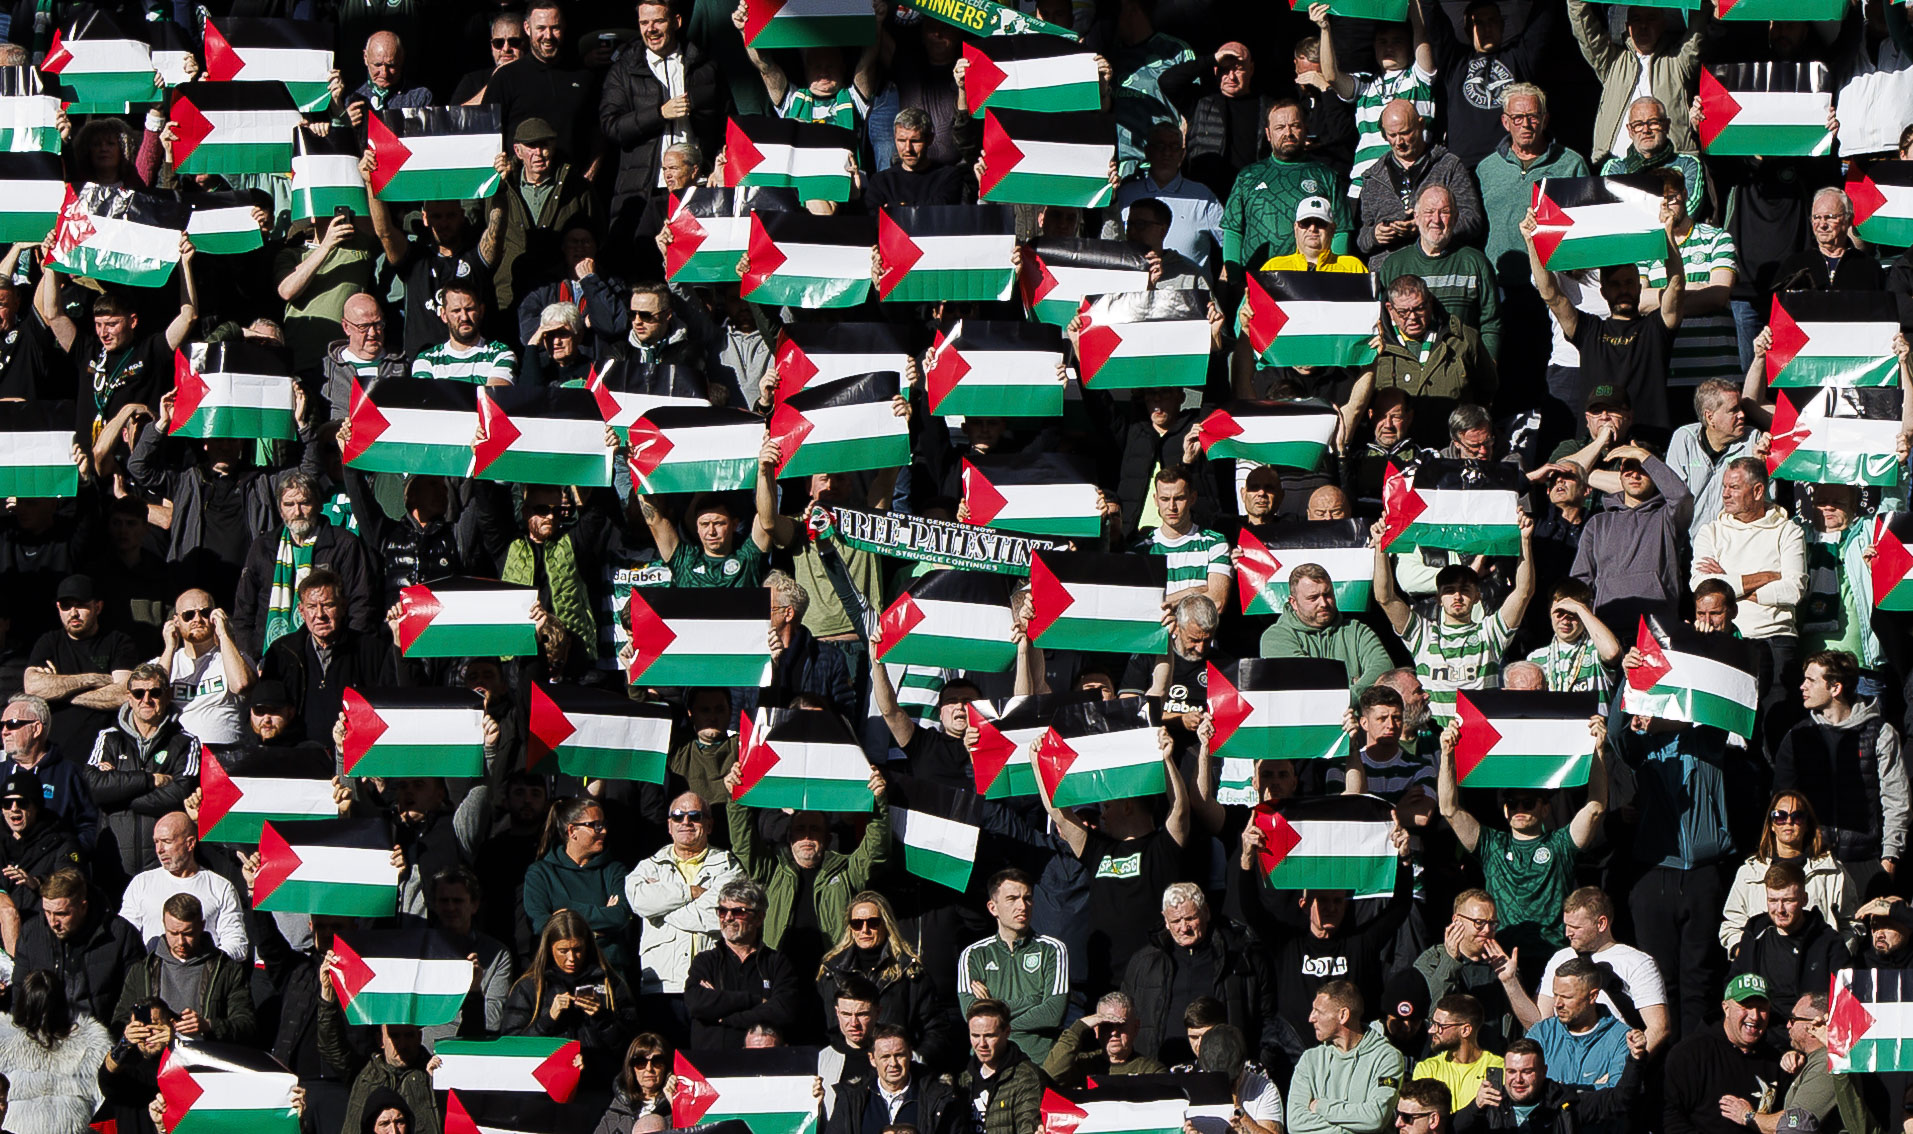 Celtic hit with three UEFA fines after Palestinian flag display at Atletico Madrid game